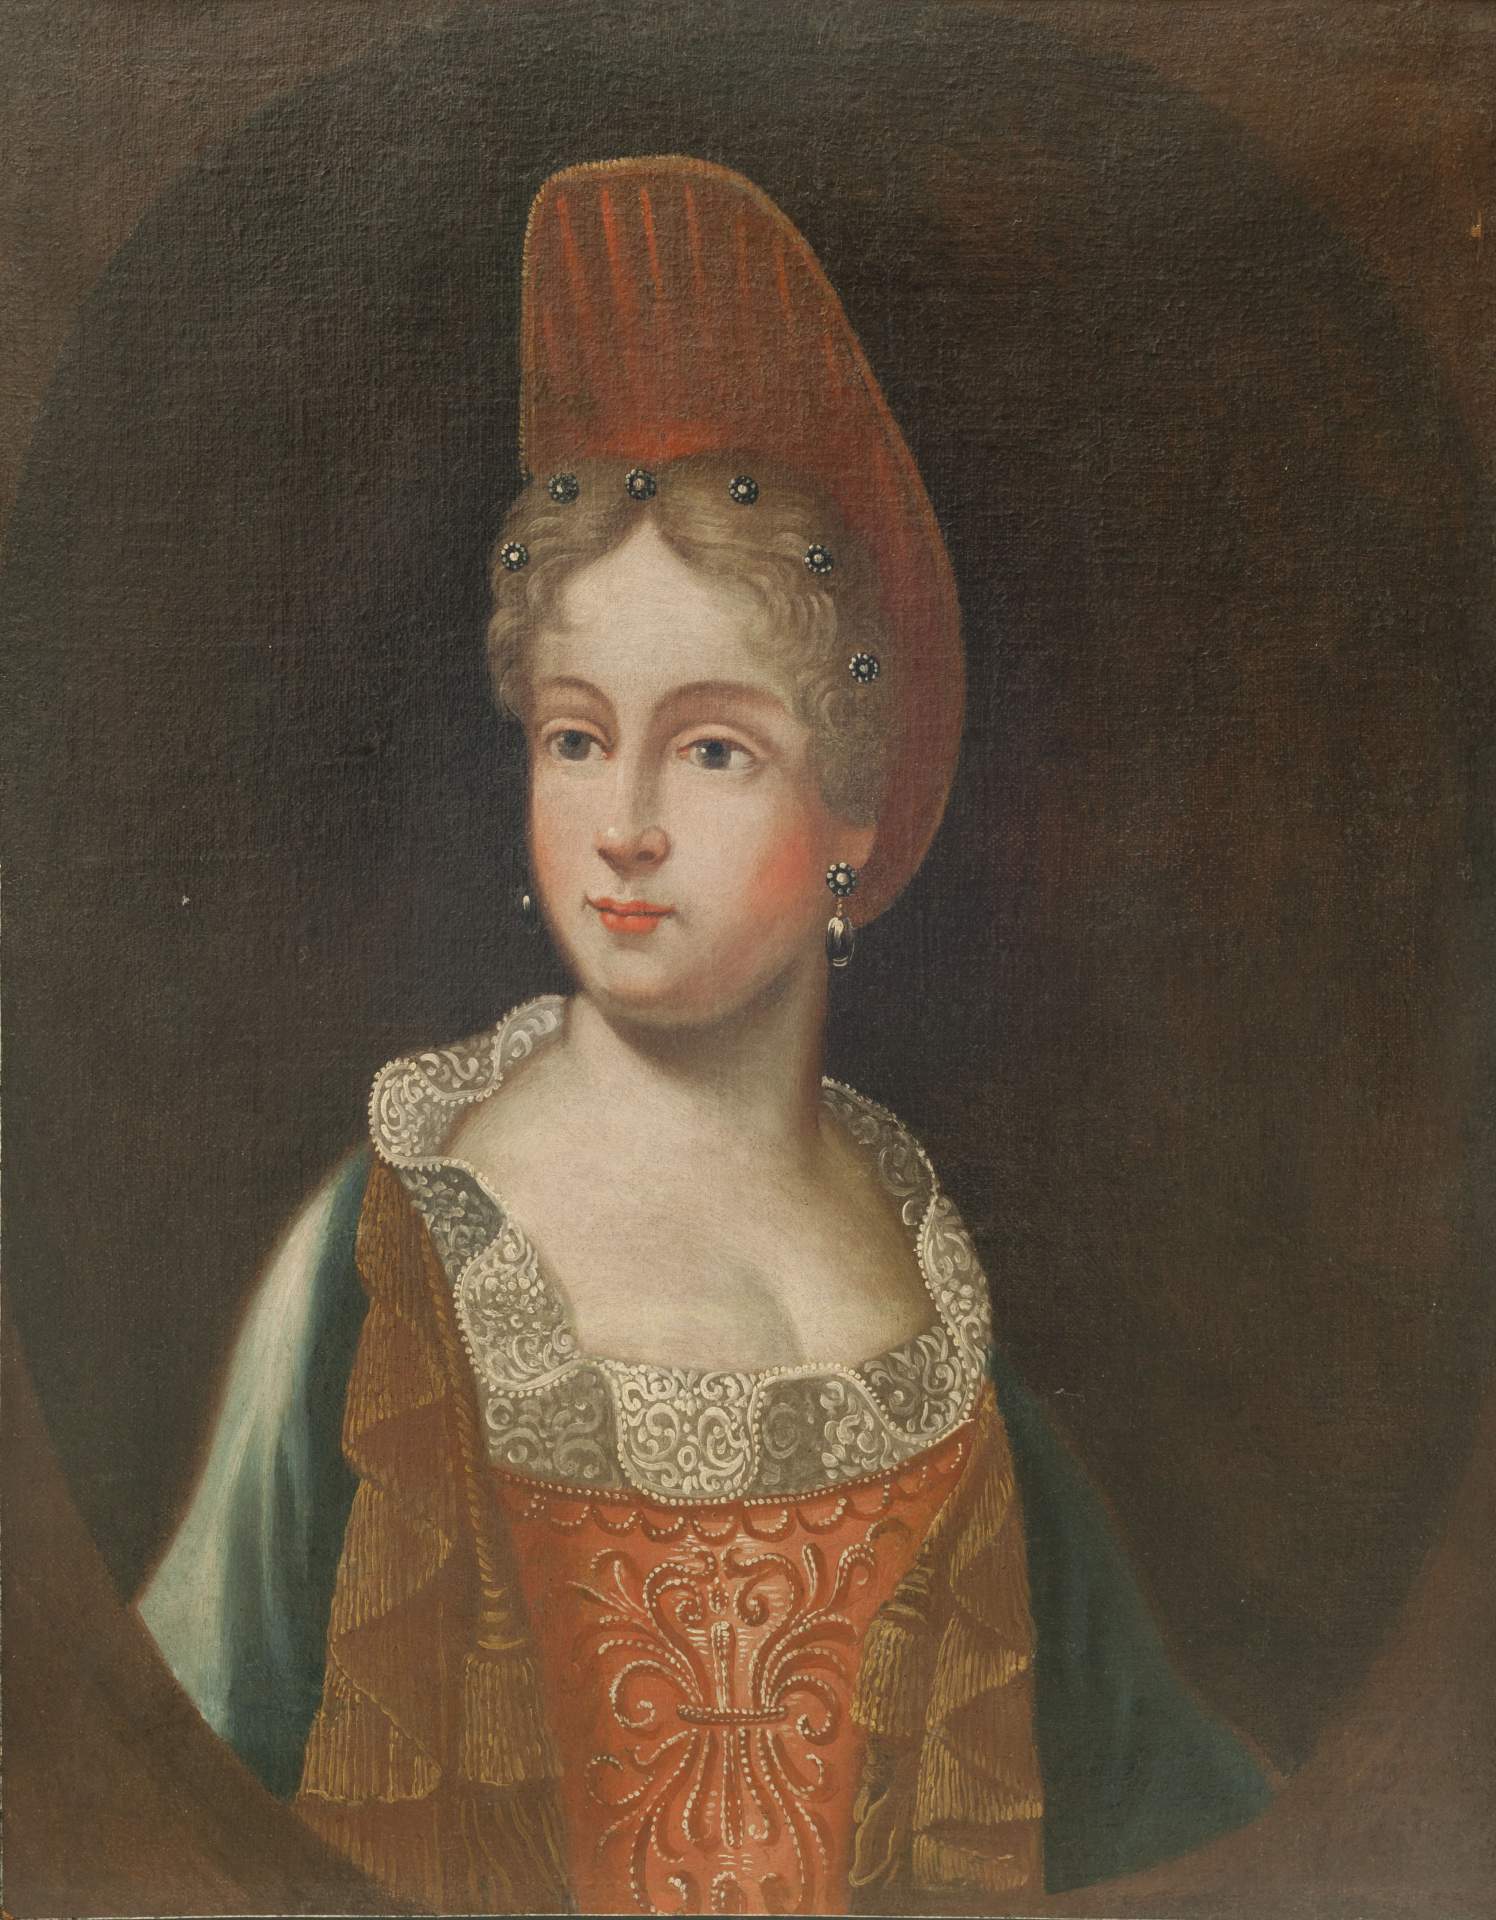 Portrait of an Unknown Woman in the style of the 19th Century